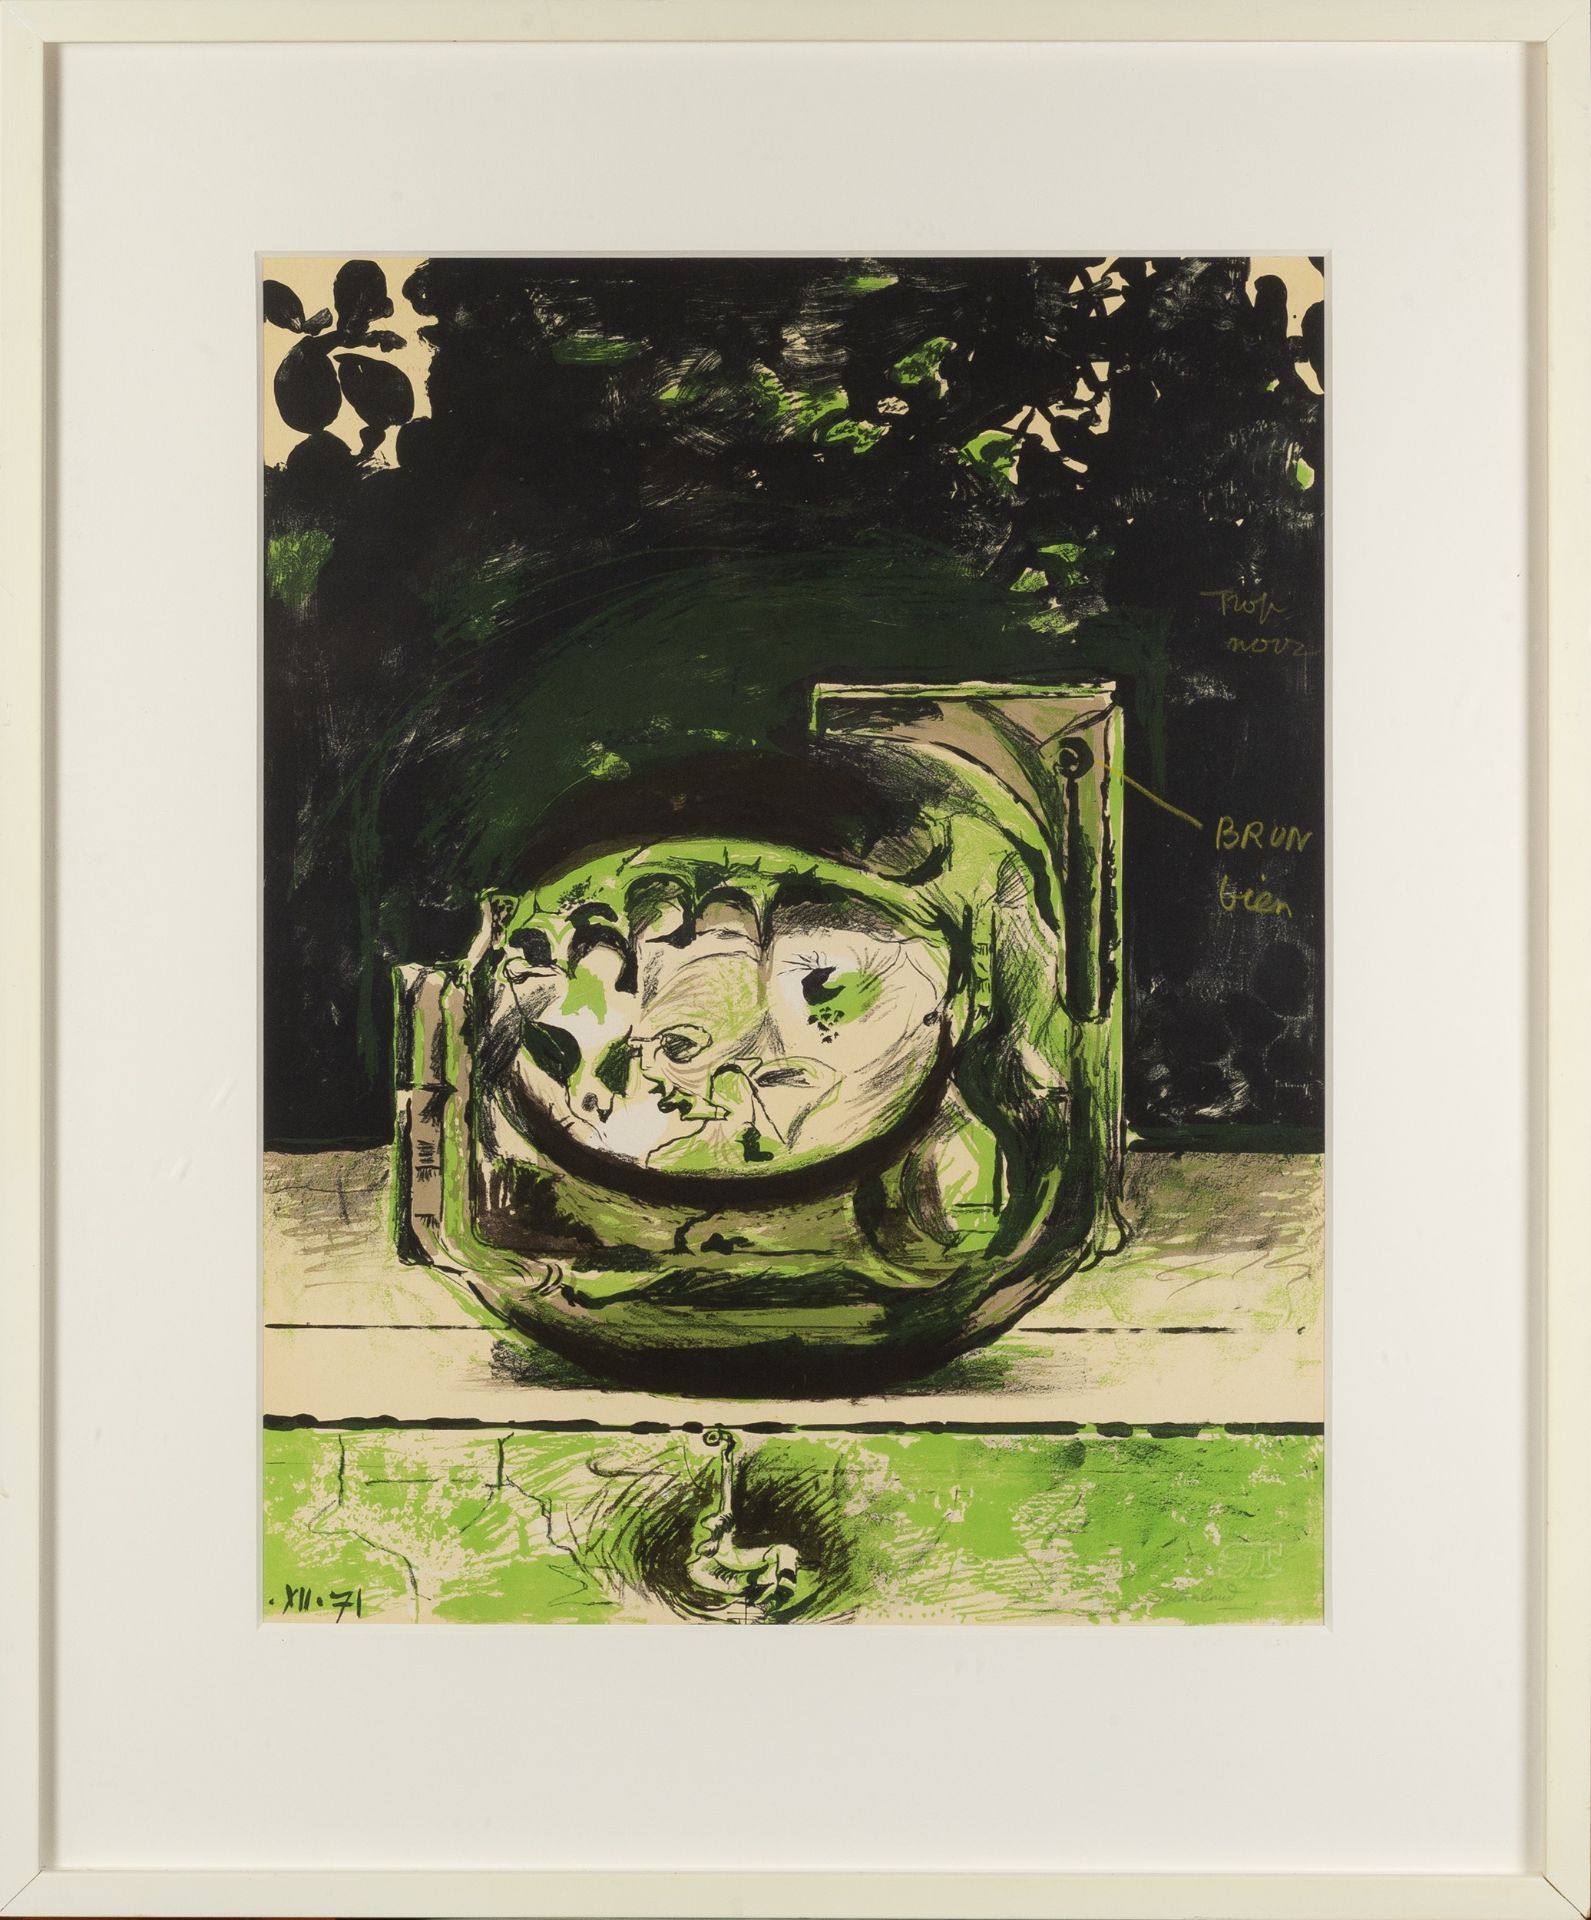 Graham Sutherland (1903-1980) The Rock I, 1973-4 lithograph 62 x 56cm. Provenance: Goldmark Gallery, - Image 2 of 3